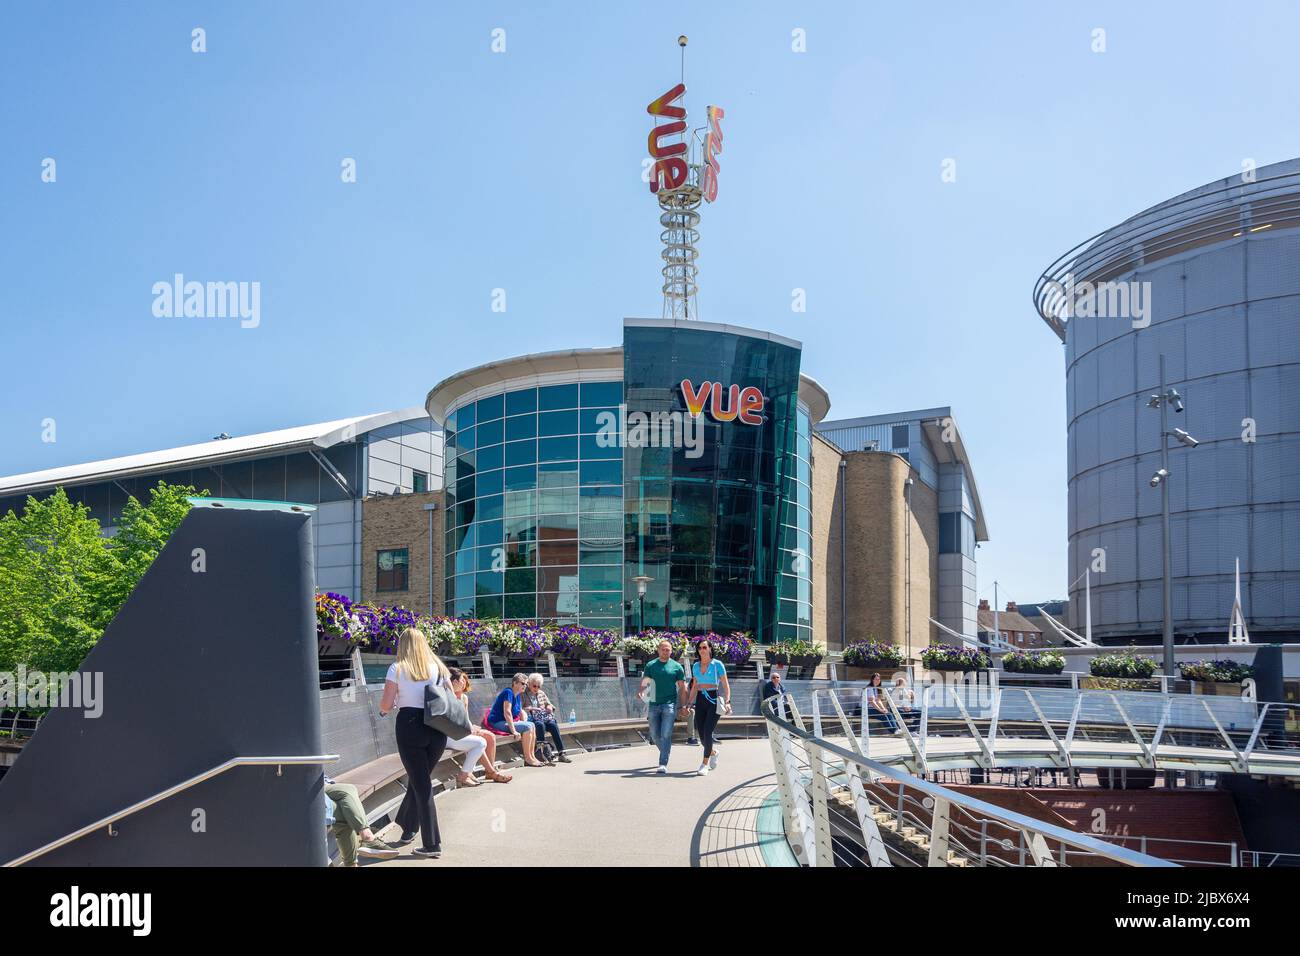 Vue Cinema at The Oracle Riverside Shopping Centre, Reading, Berkshire, England, United Kingdom Stock Photo